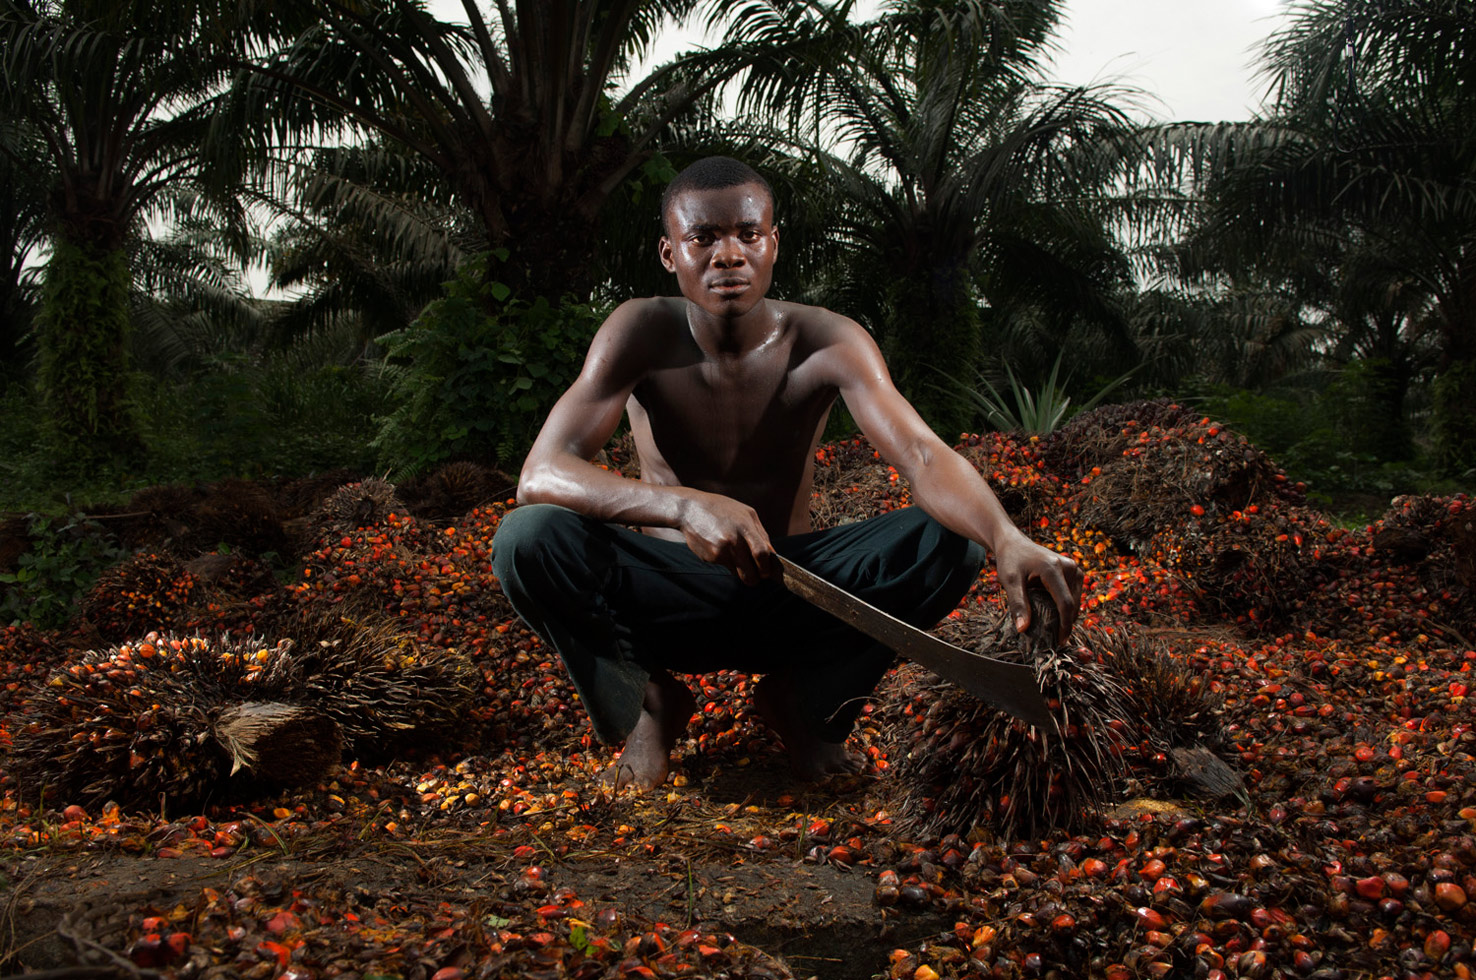 Calabar, Nigeria, 2011
"Henshaw is 20 years old and utilizes a machete to cut the bunches of fruit from oil palms. The palm oil industry is having a devastating impact on the environment, but with few options, local workers see the opportunity as a source of employment."